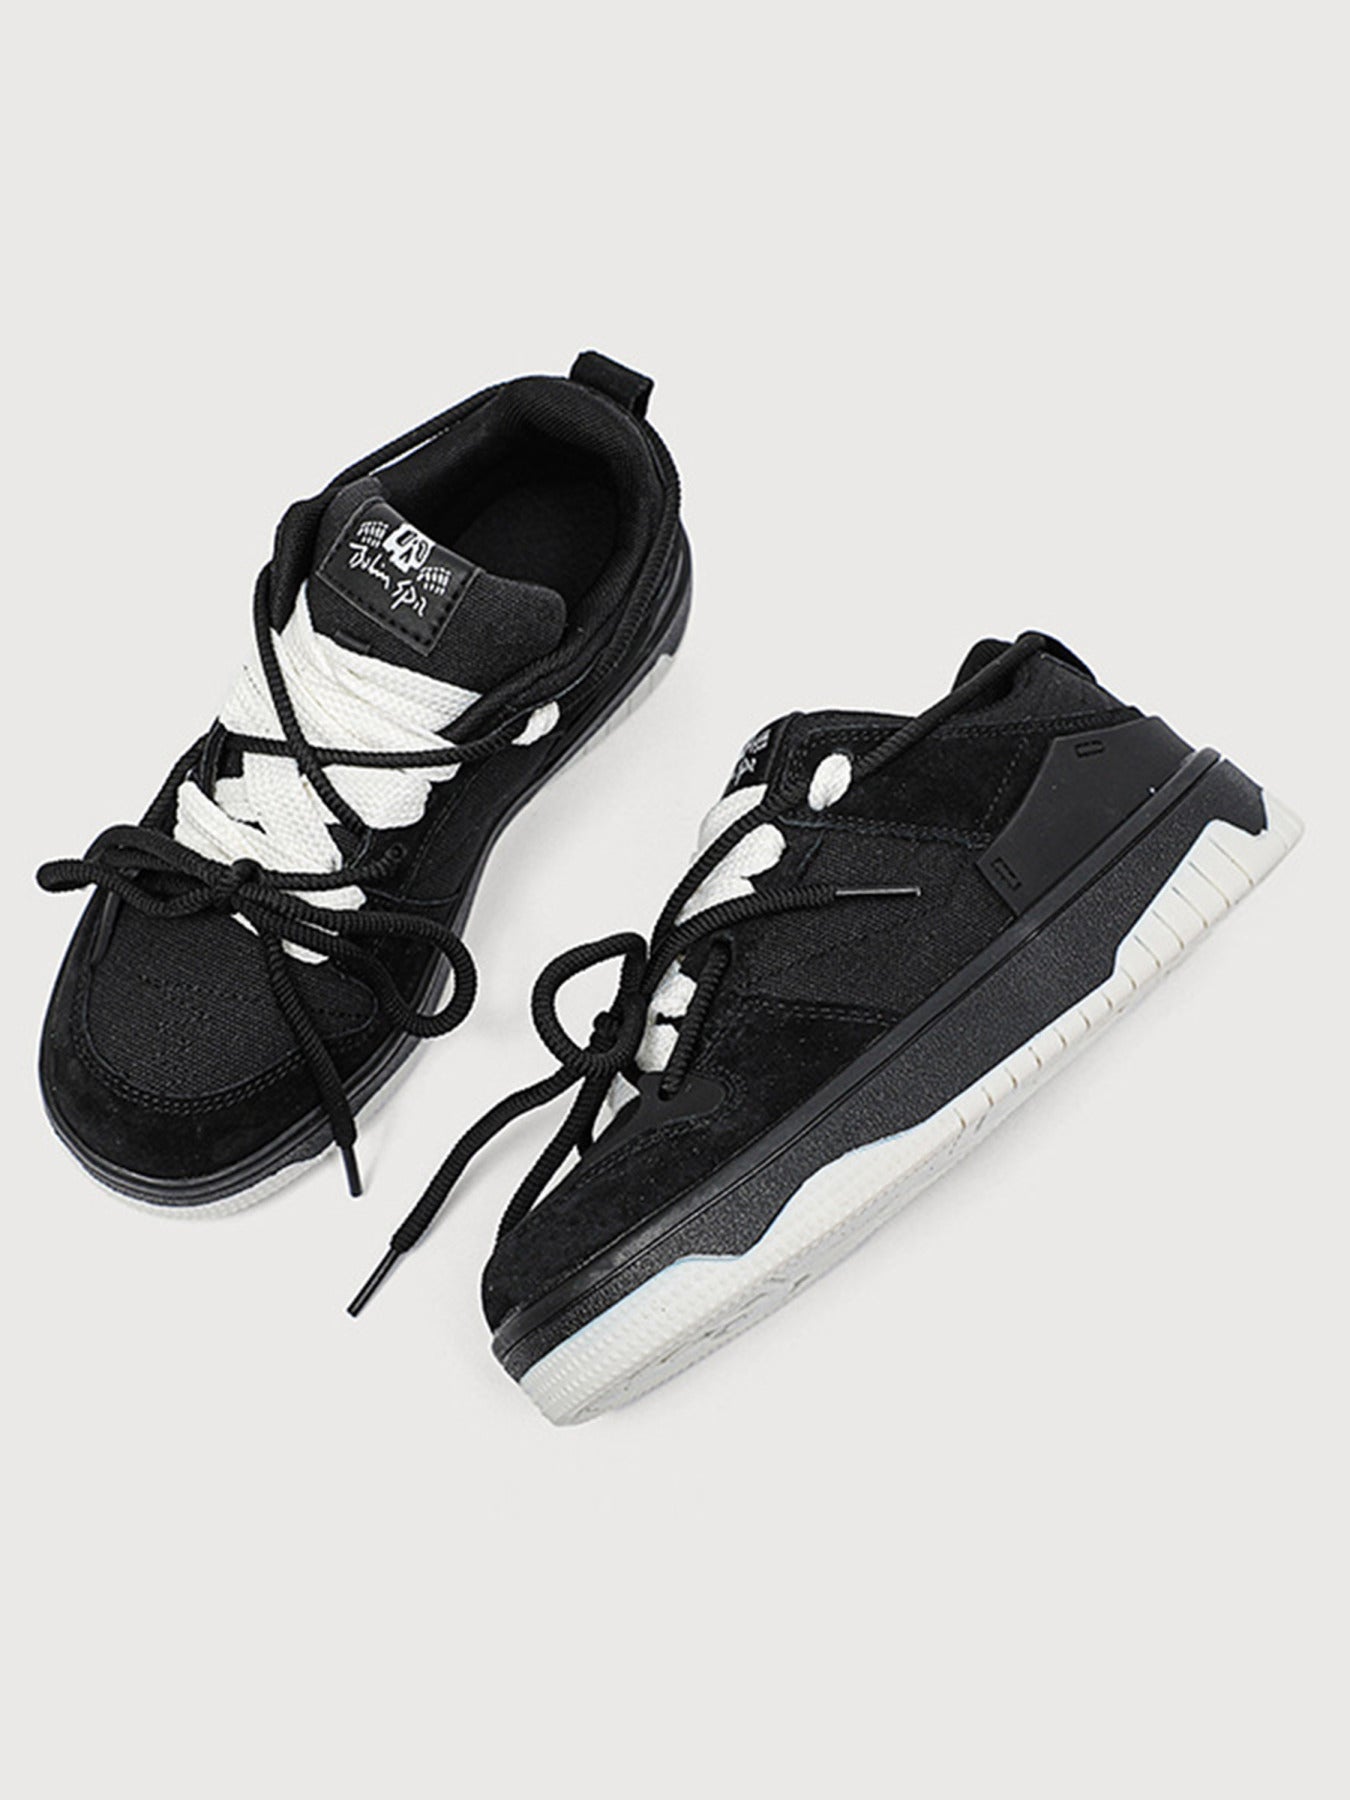 Thesupermade Casual And Versatile Sports Couple Shoes